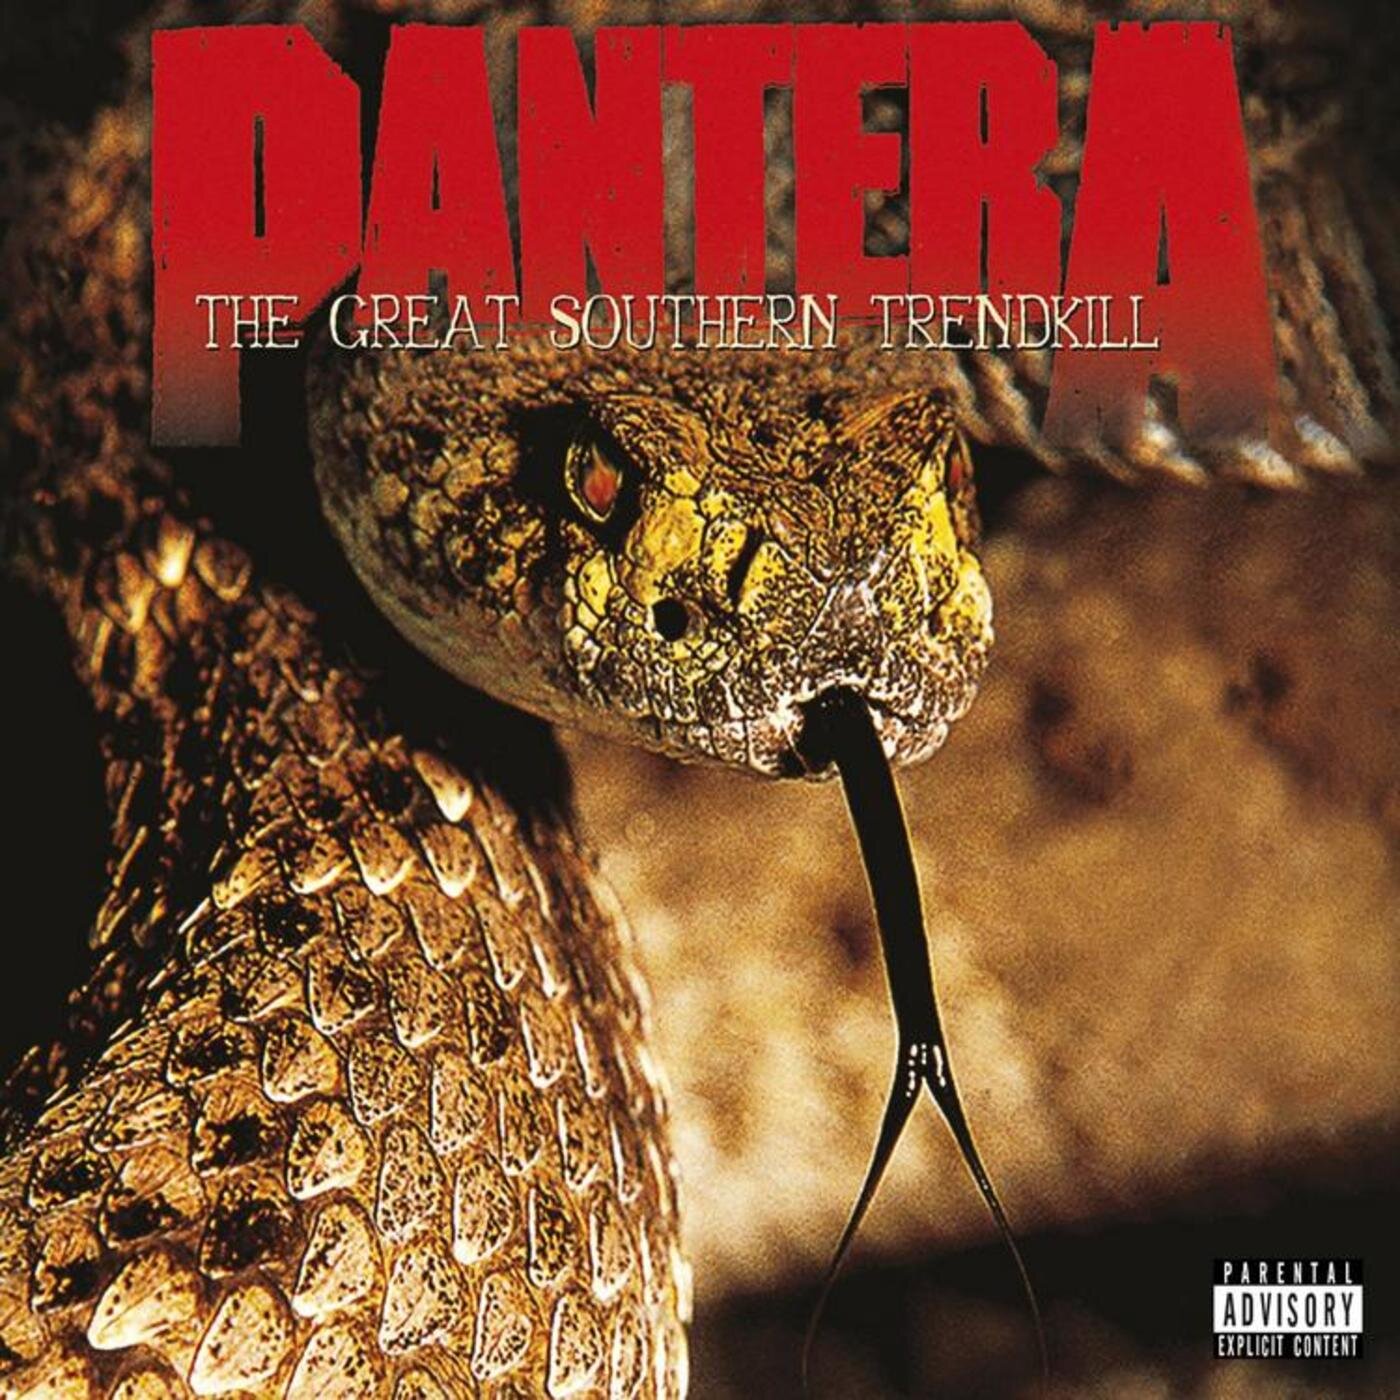 Vol 5, Track 14: ENCORE: ”The Great Southern Trendkill” by Pantera